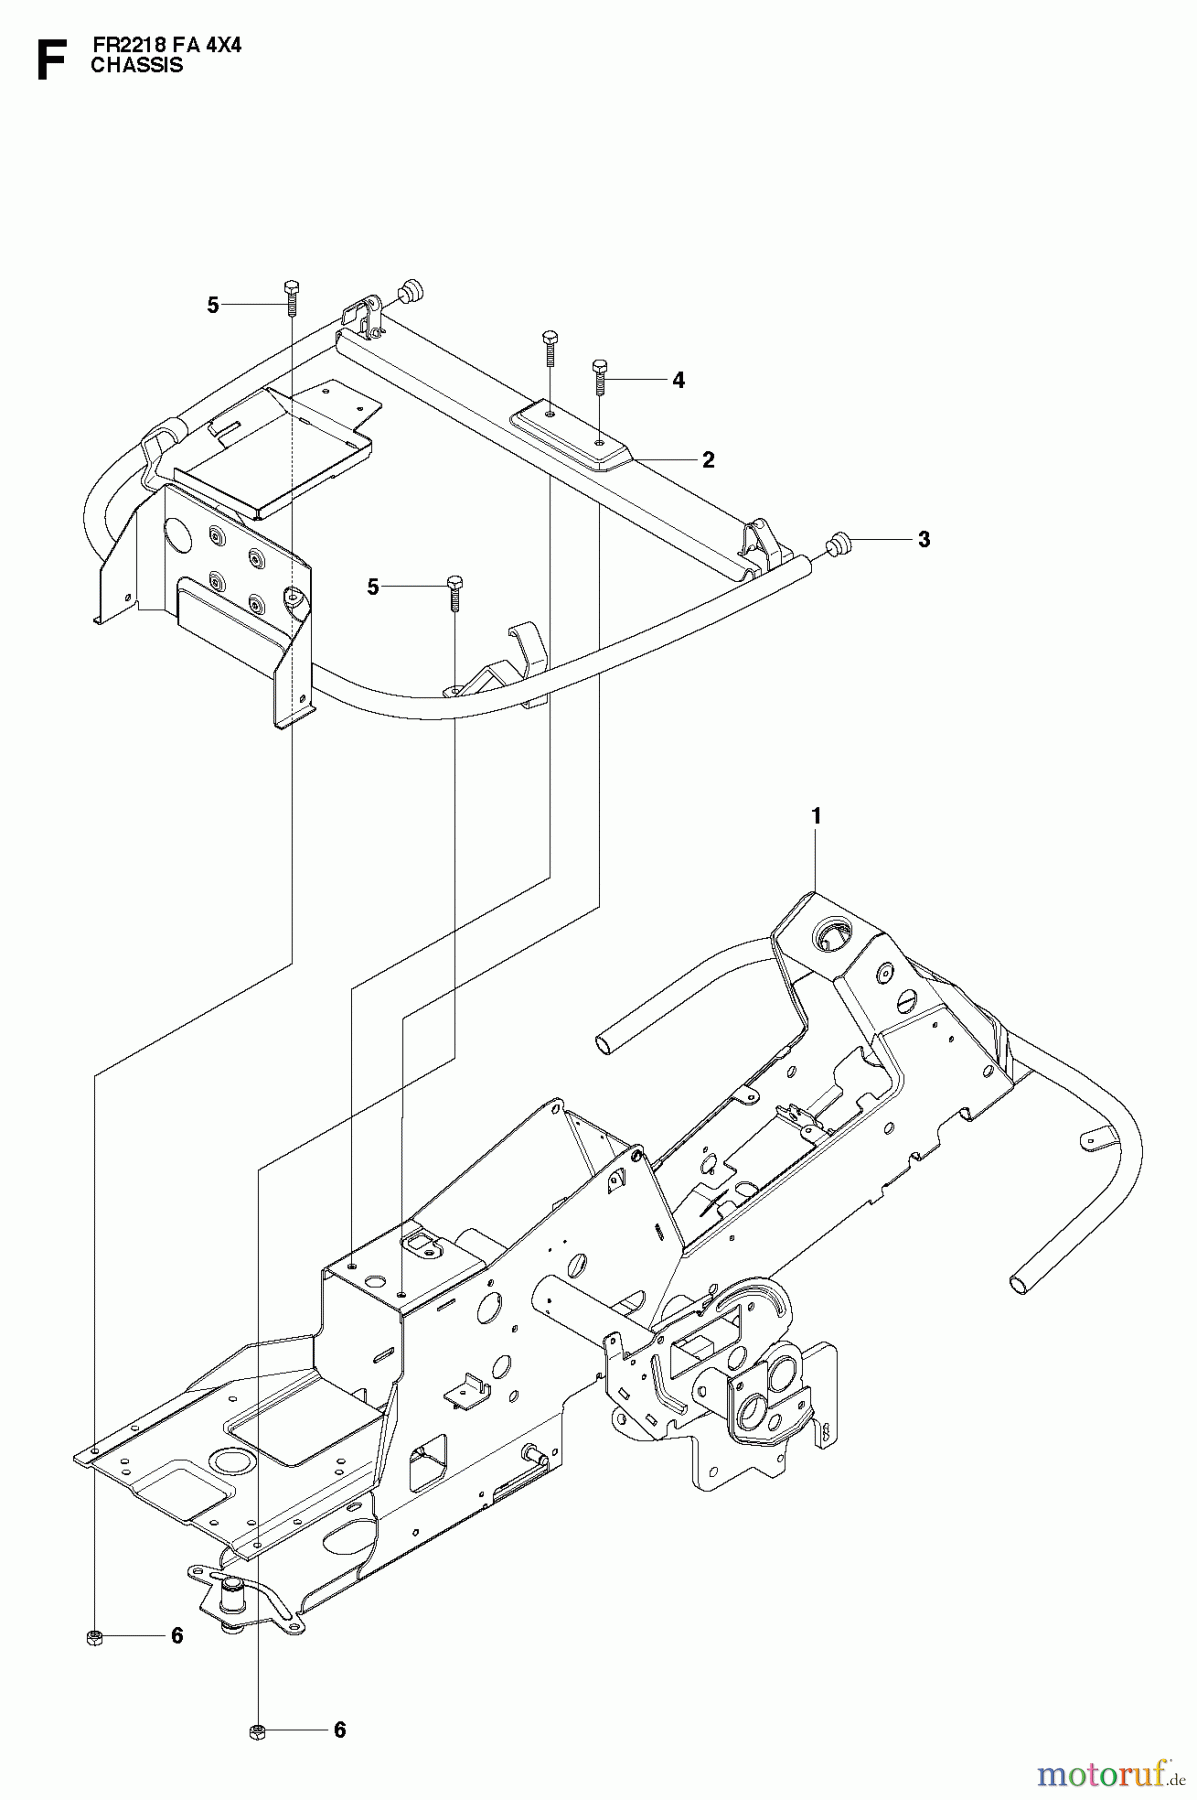  Jonsered Reitermäher FR2218 FA 4x4 (966415001) - Jonsered Rear-Engine Riding Mower (2010-07) CHASSIS ENCLOSURES